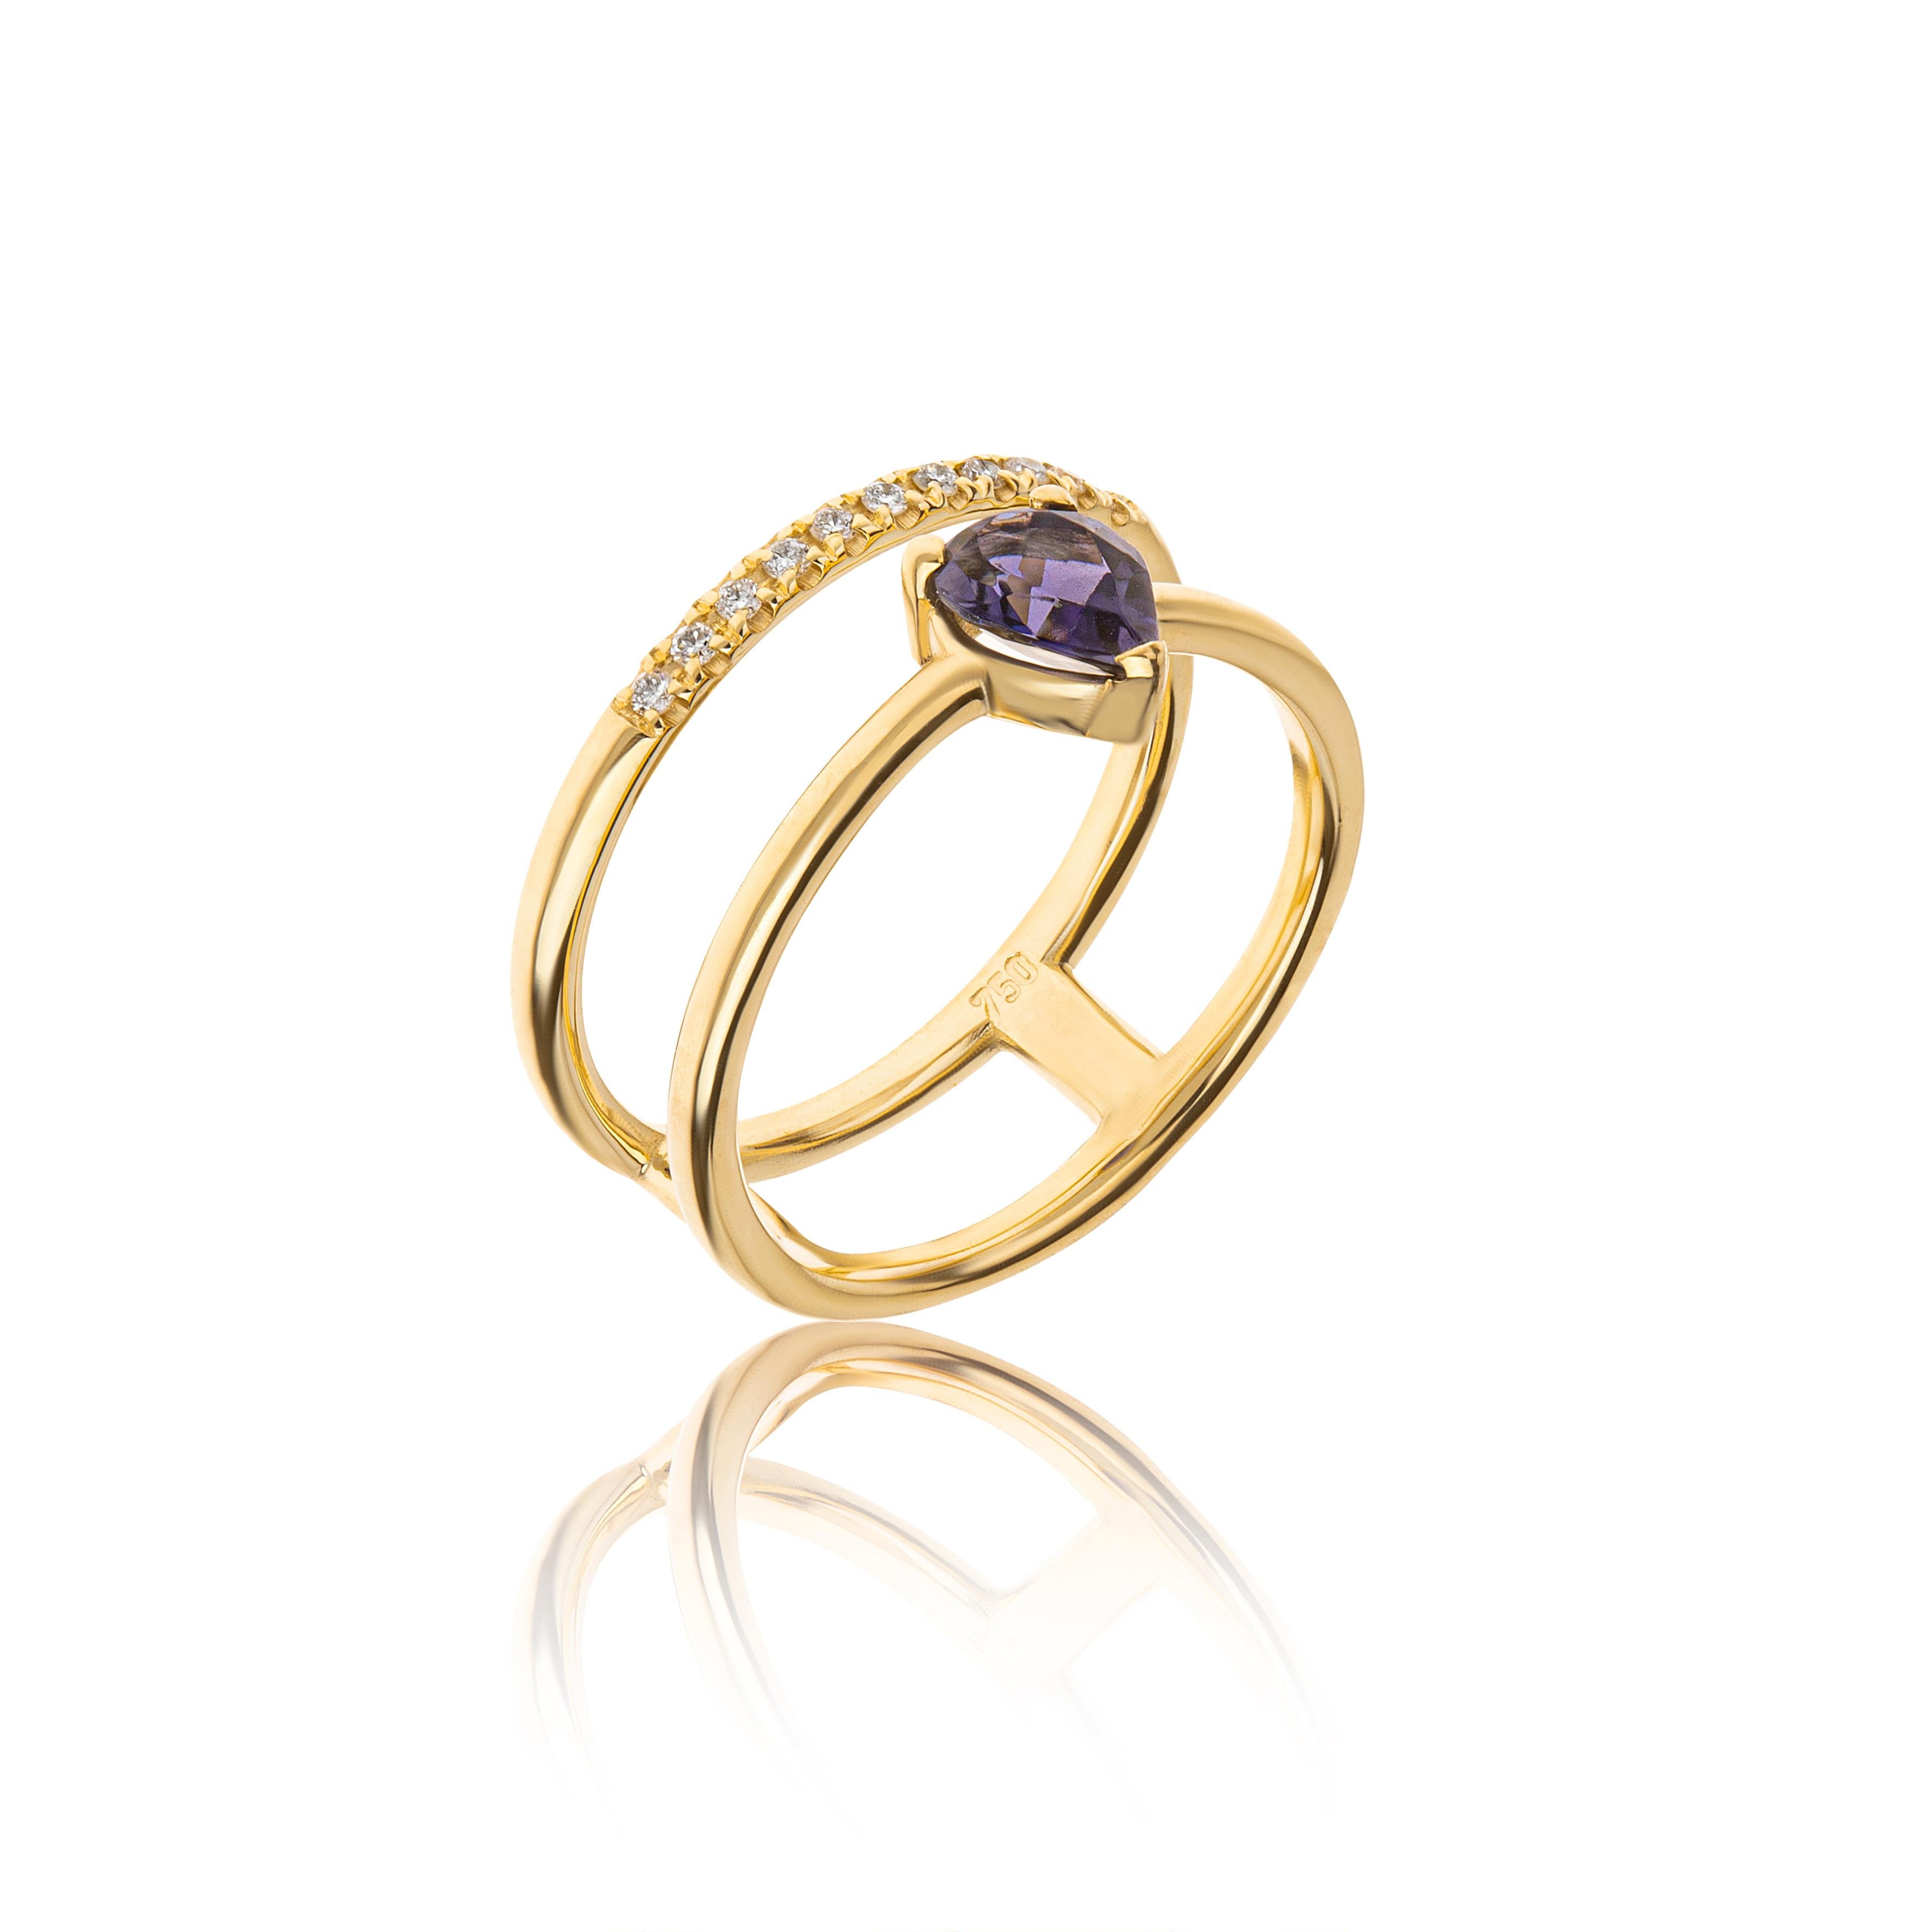  Iolite Pear Cut Double Ring with Diamonds Brilliant Cut in 18Kt Yellow Gold
The ring is hand made in 18Kt yellow gold. The main stone in the center is iolite 0.45ct. pear cut and the second row has diamonds 0.07ct
It is a delicate, modern and